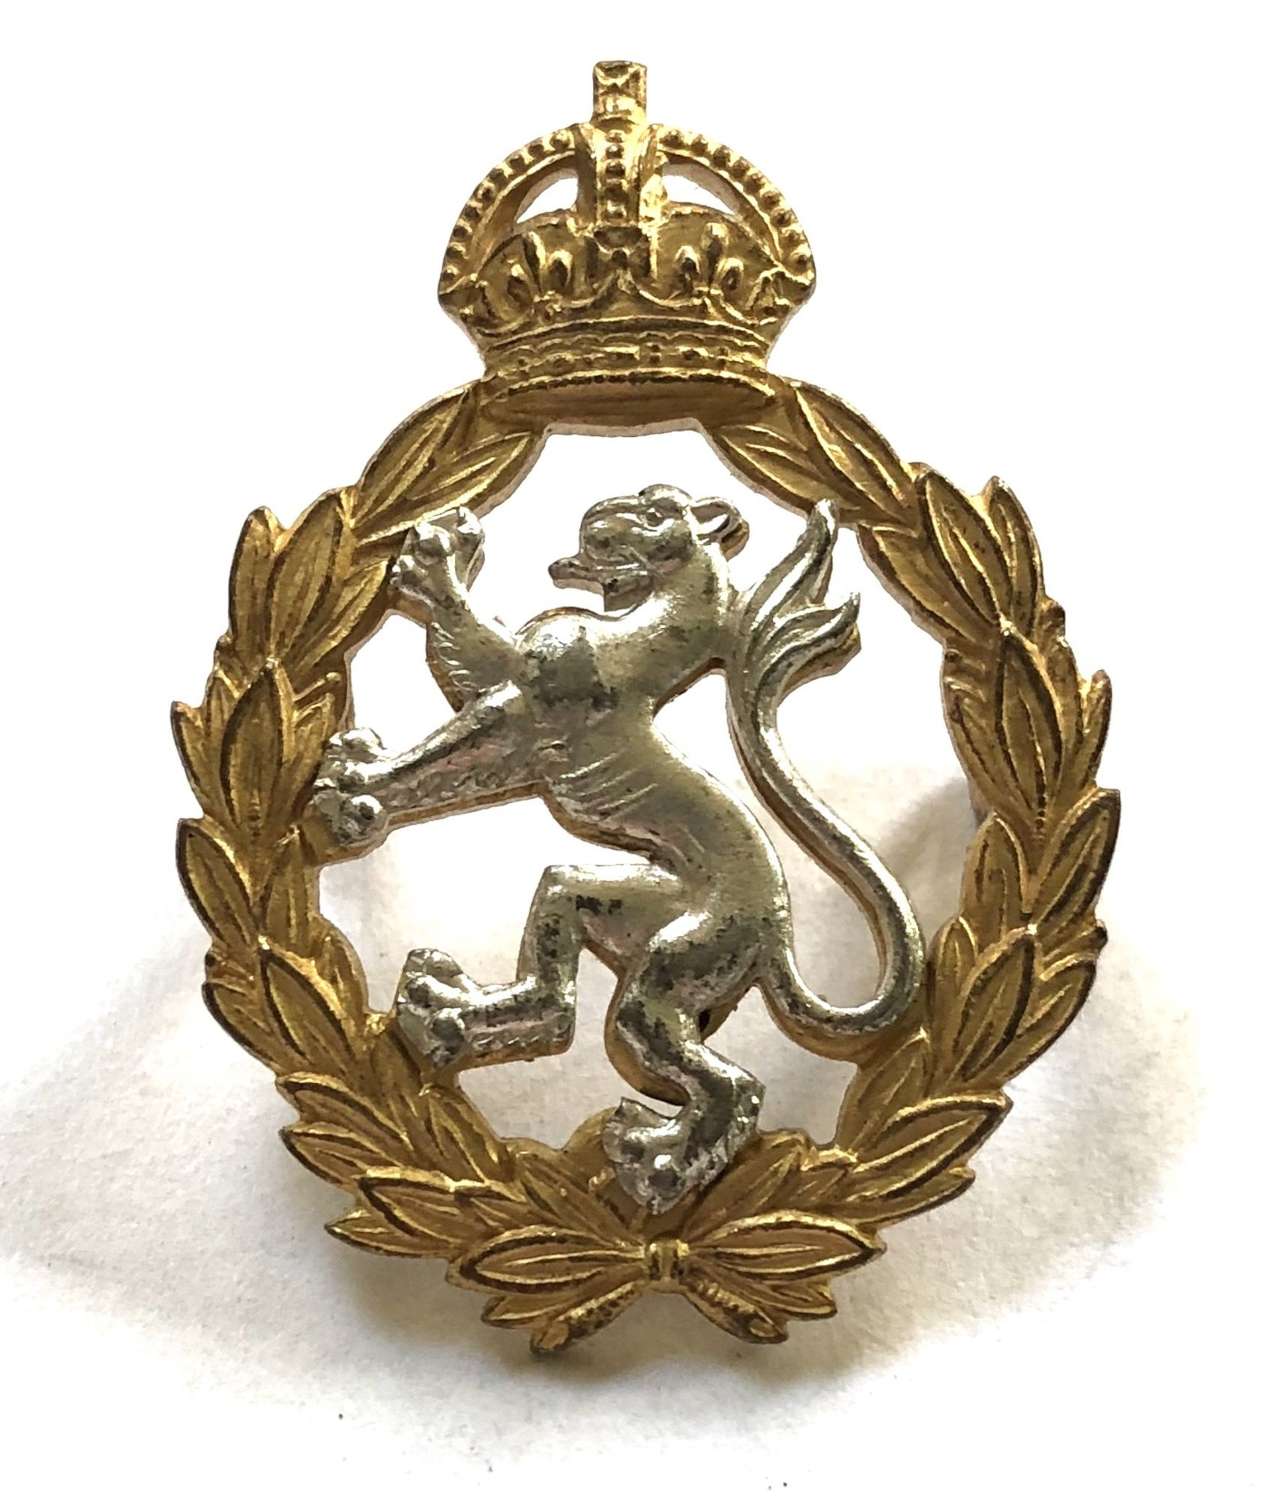 Women's Royal Army Corps WRAC Officer's cap badge c1949-52 by Firmin